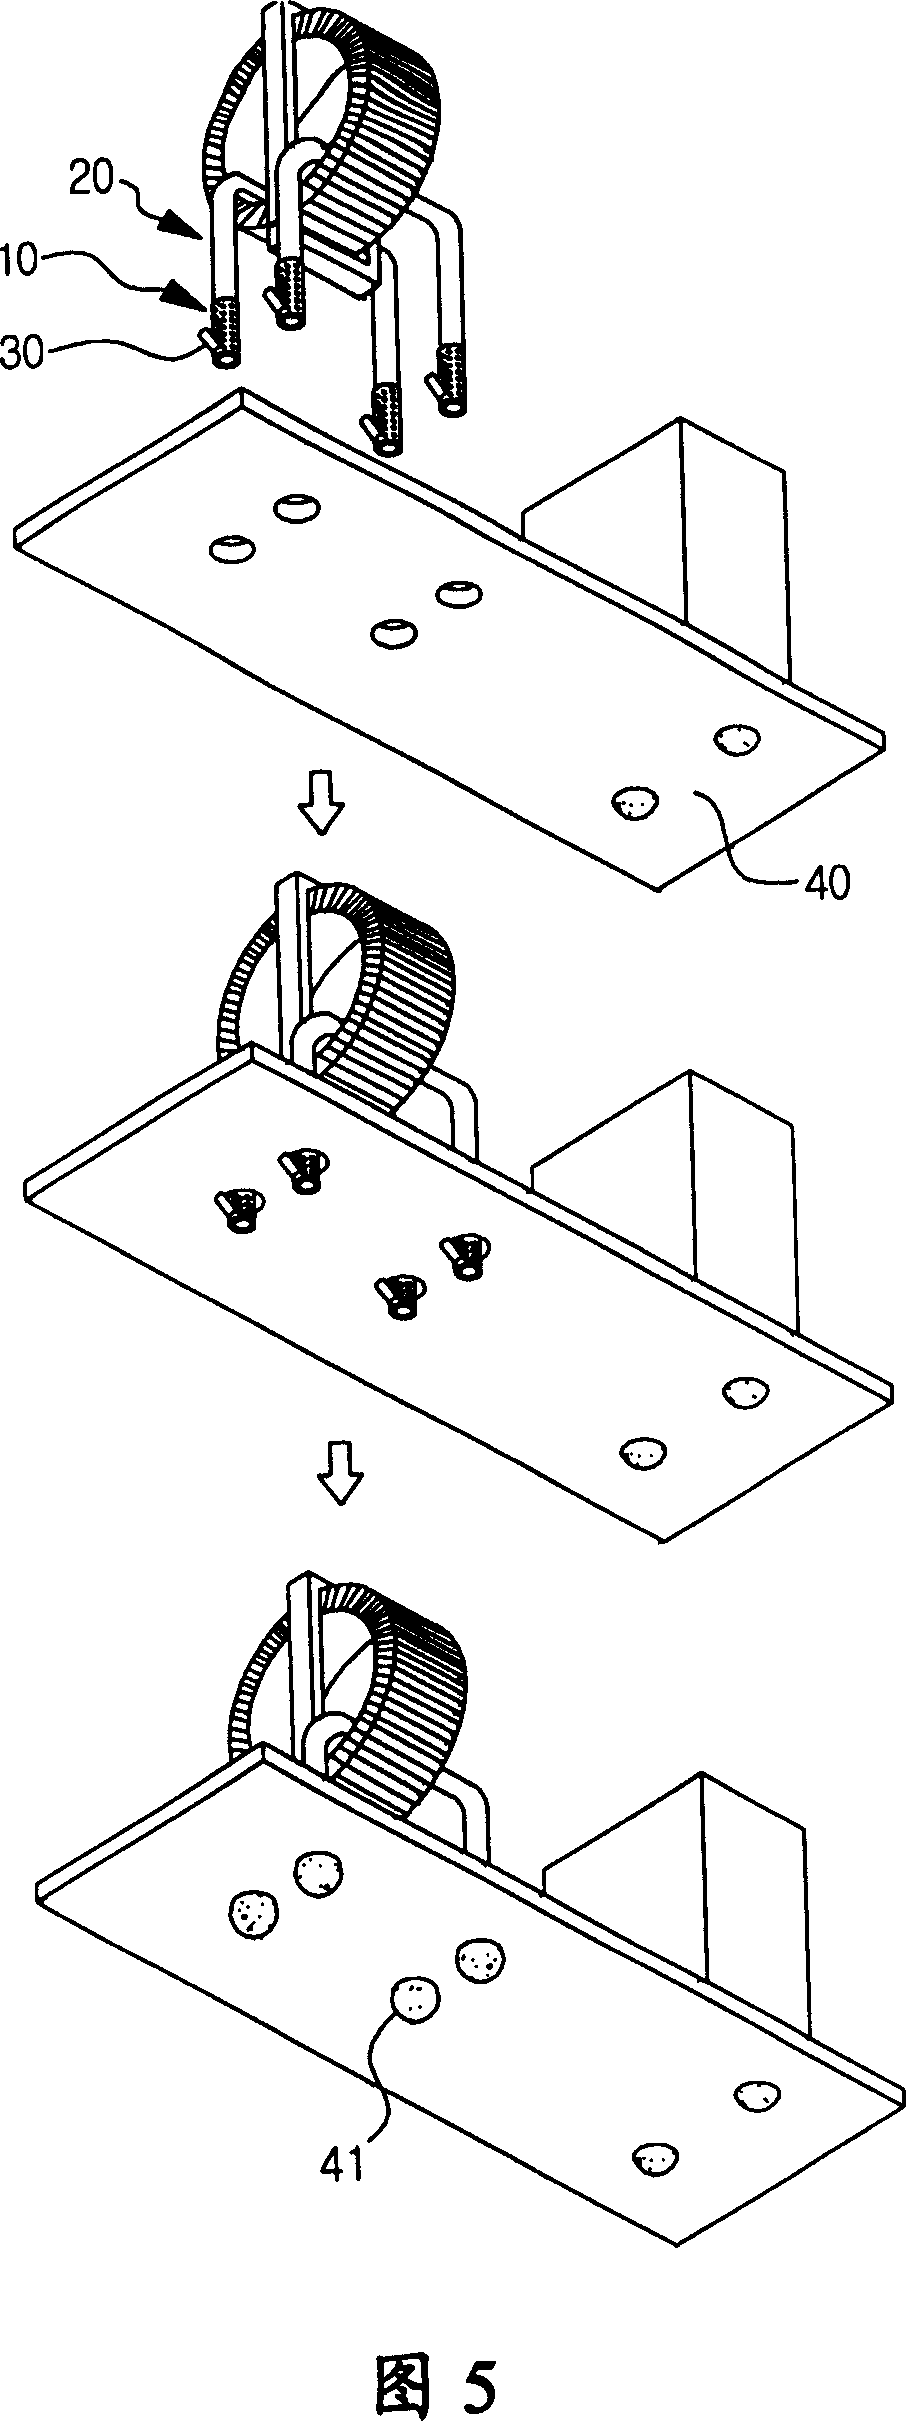 Connector pin for printed circuit board